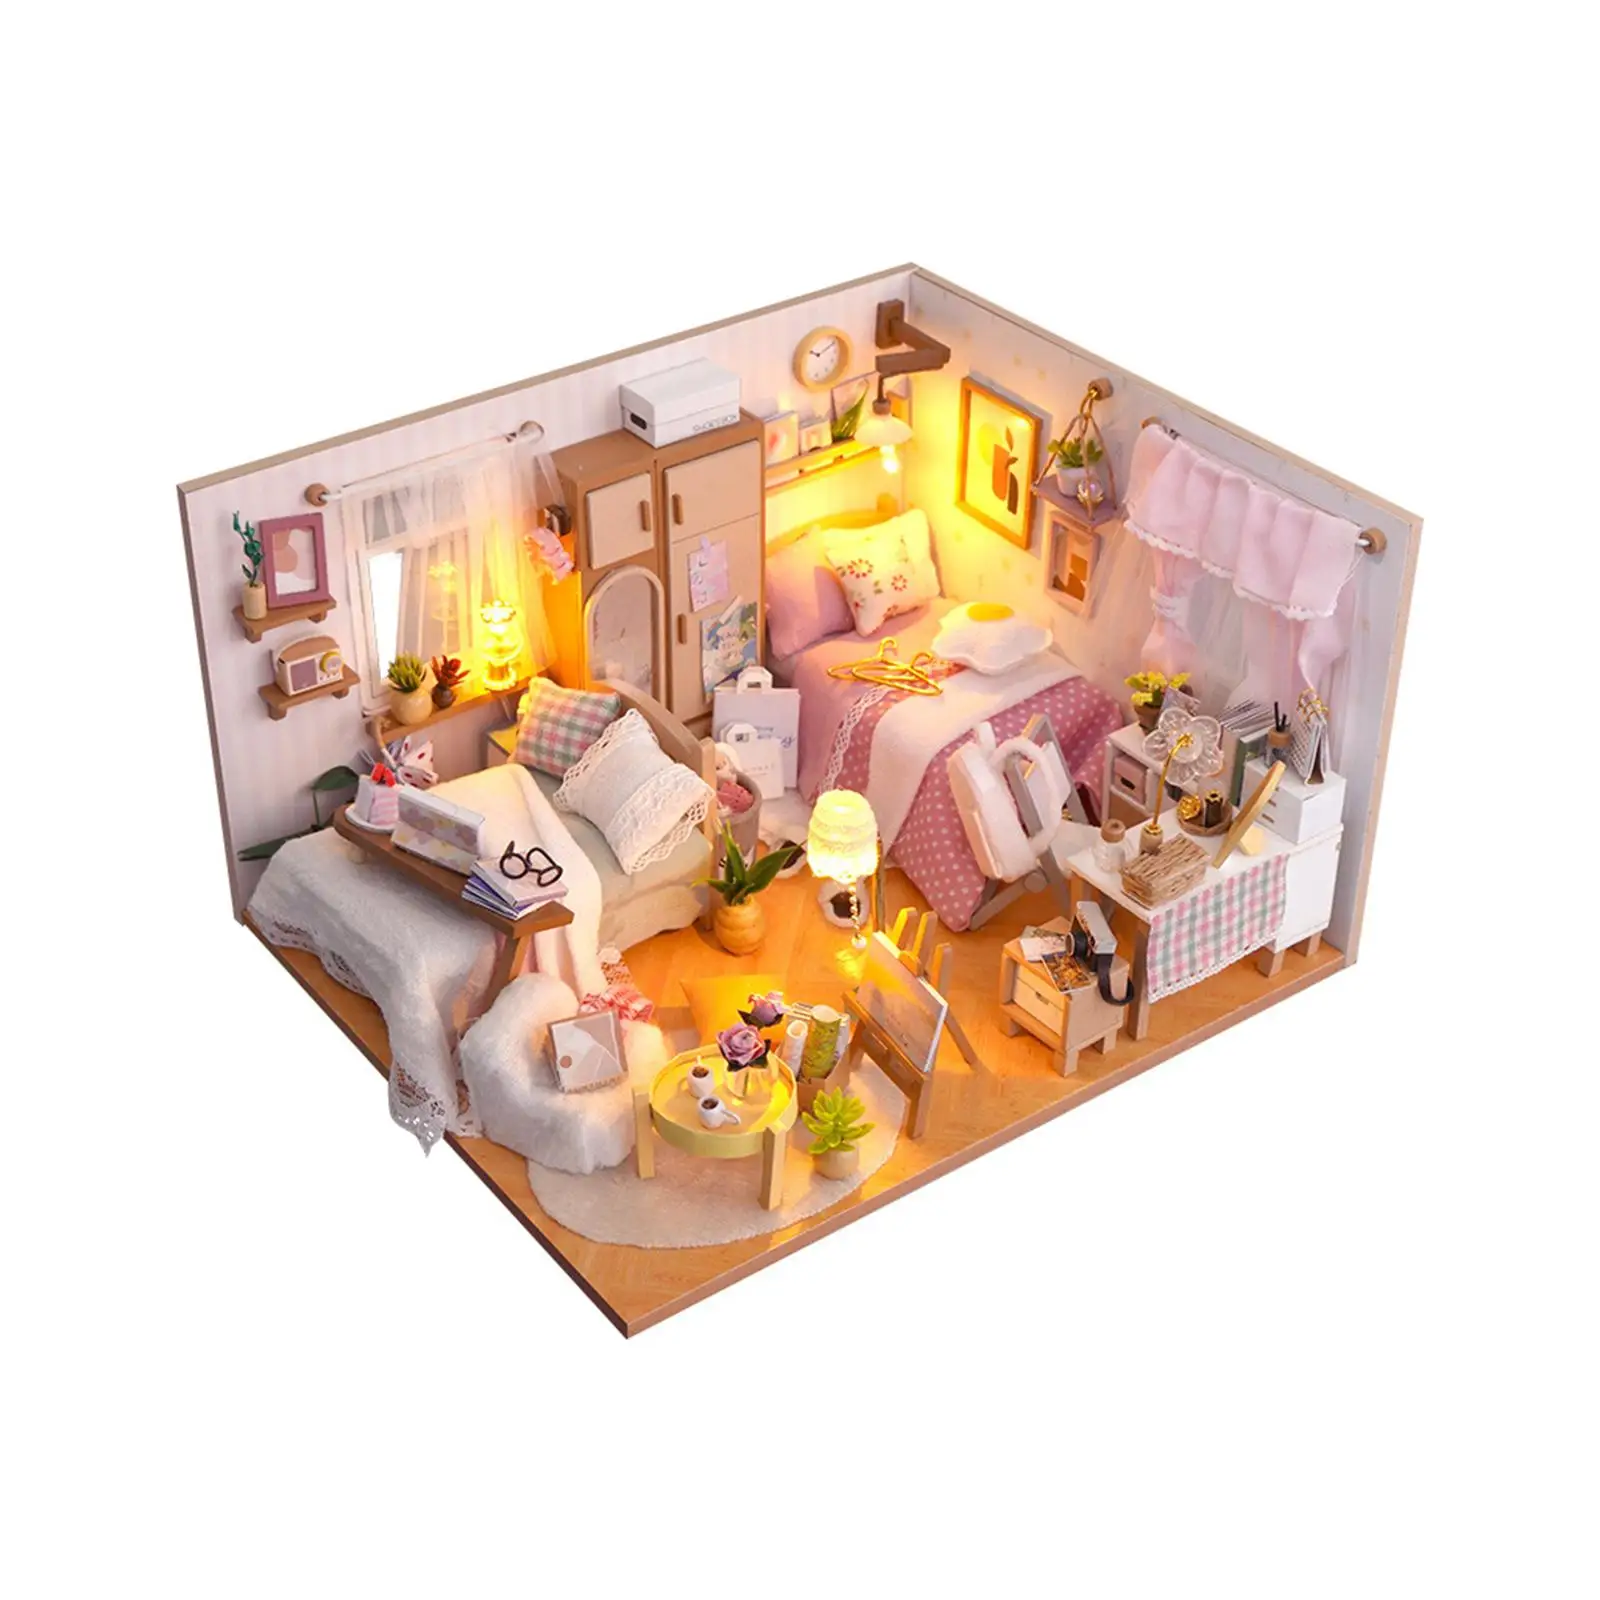 Wooden Miniature Dollhouse Kits Collectibles Birthday Gifts Creative Bedroom